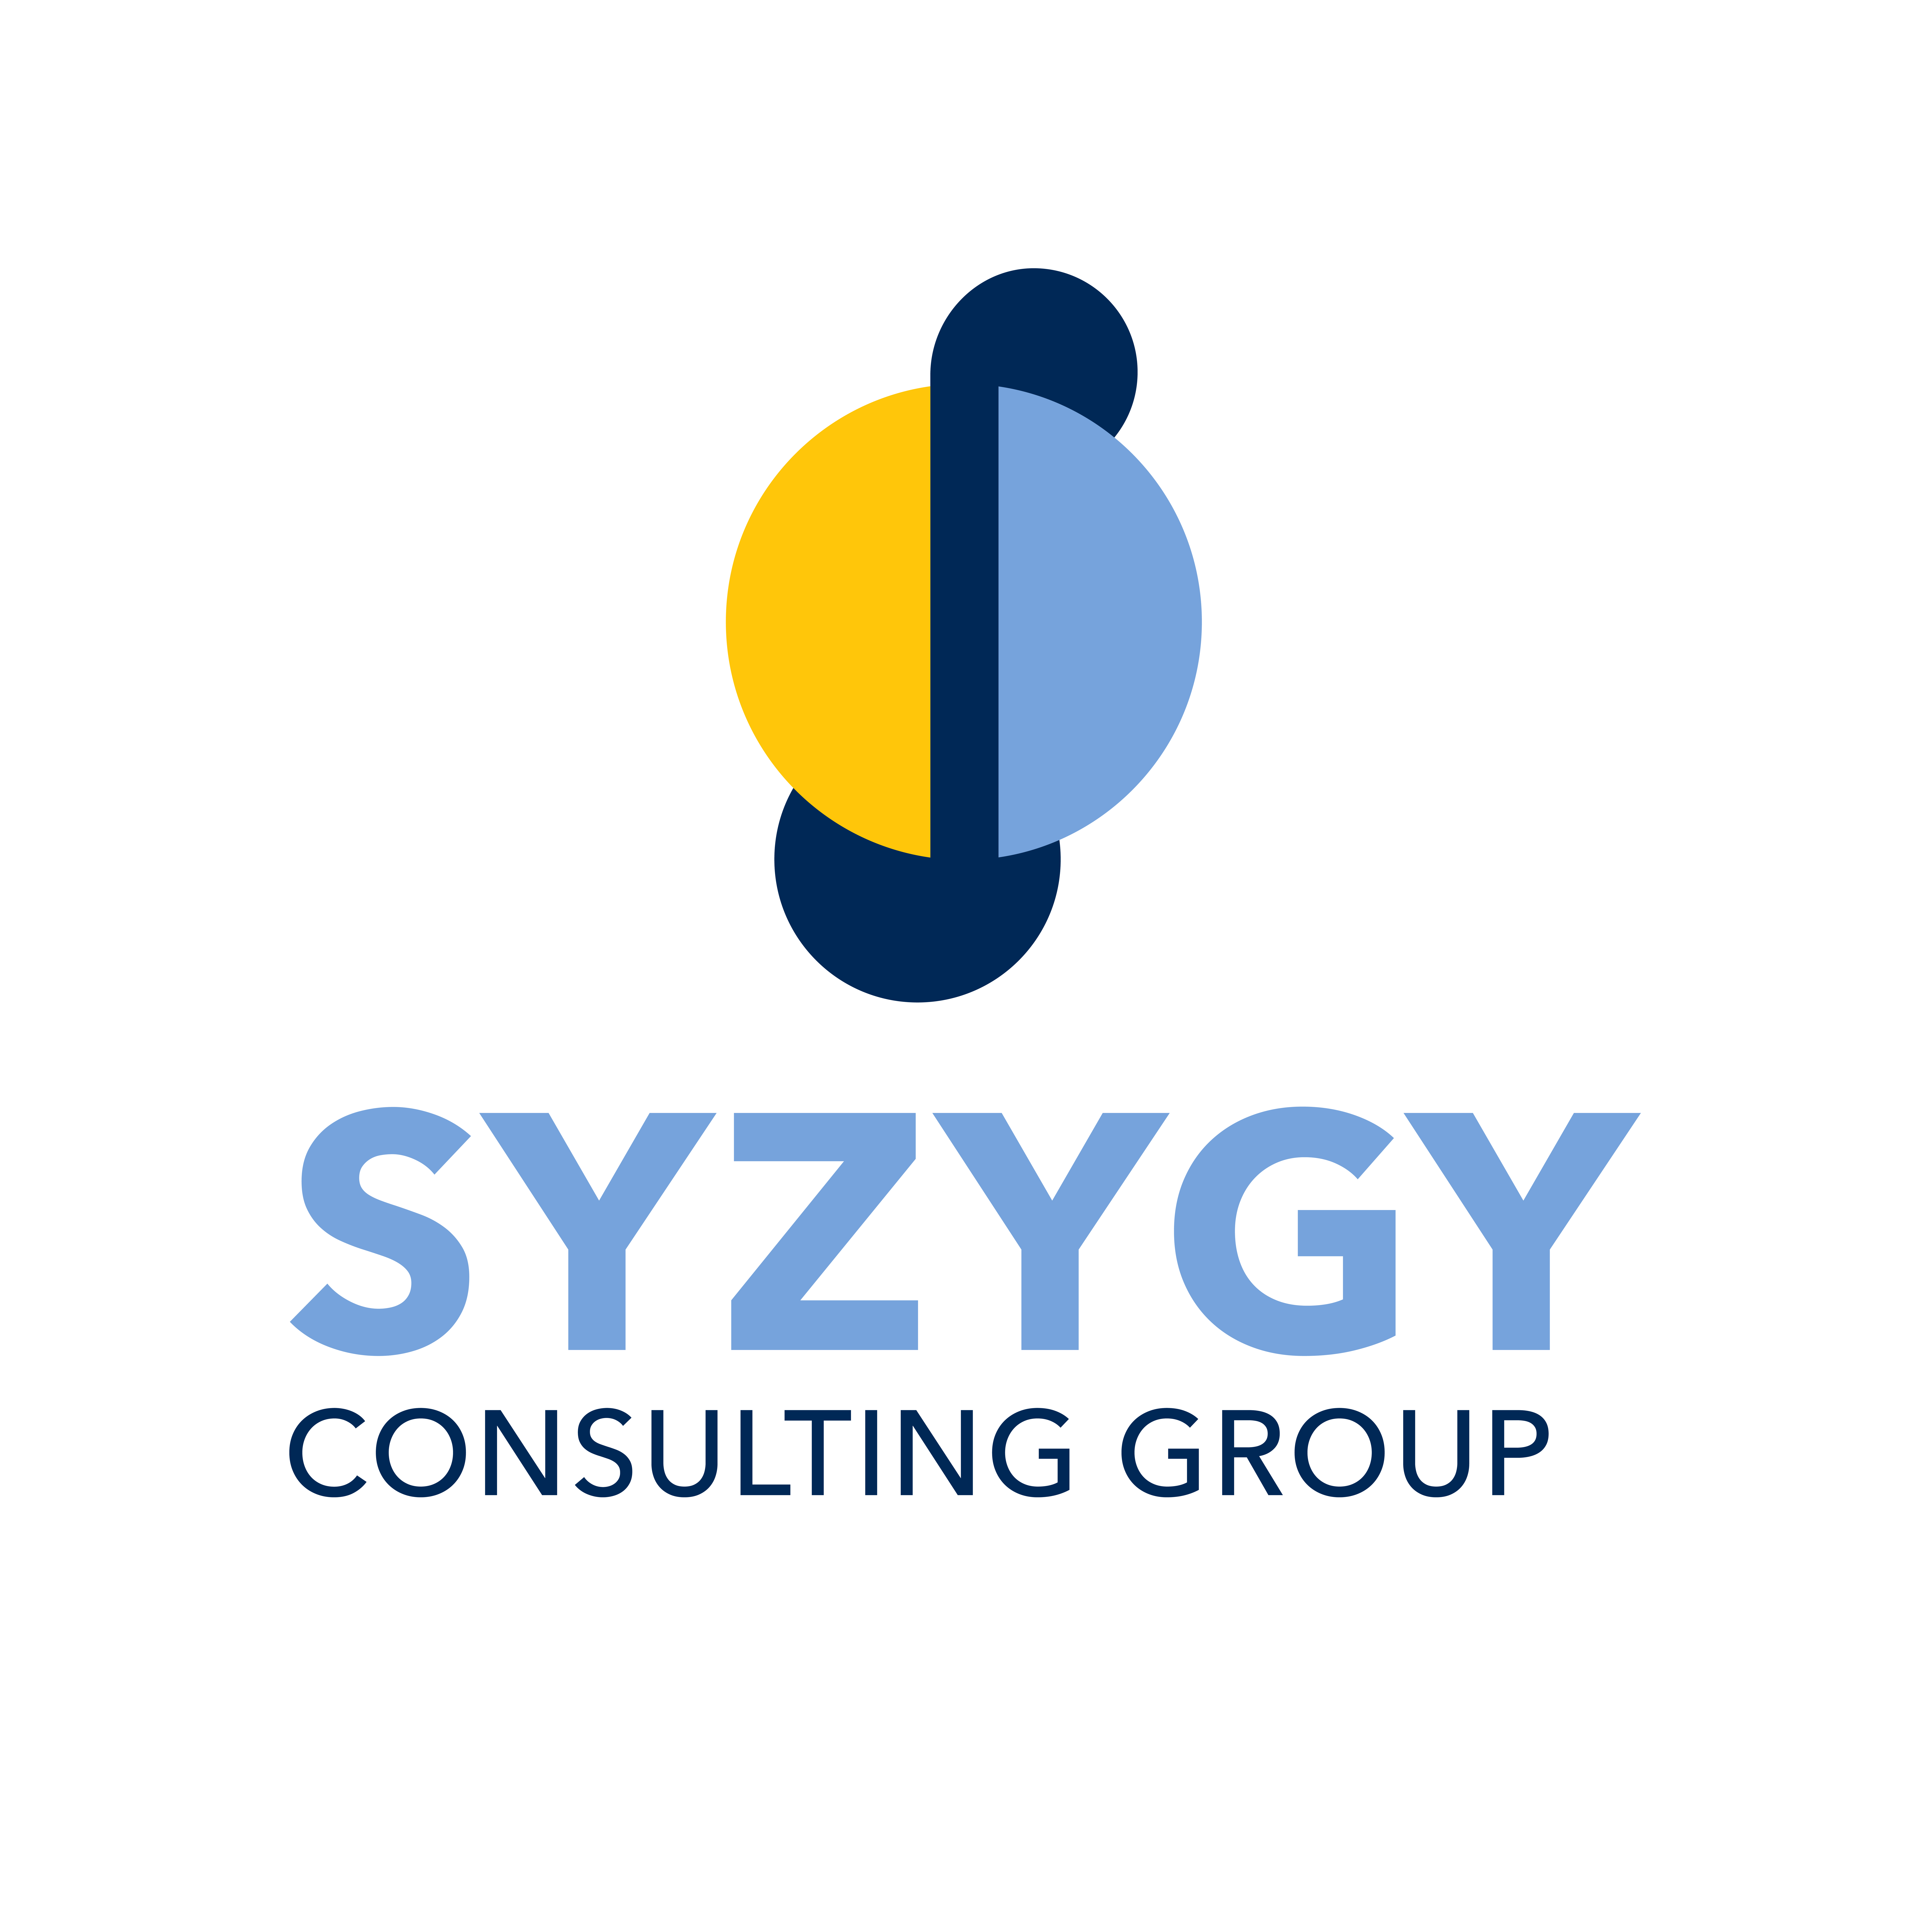 Syzygy Consulting Group - Kings Langley, NSW - 0402 092 665 | ShowMeLocal.com